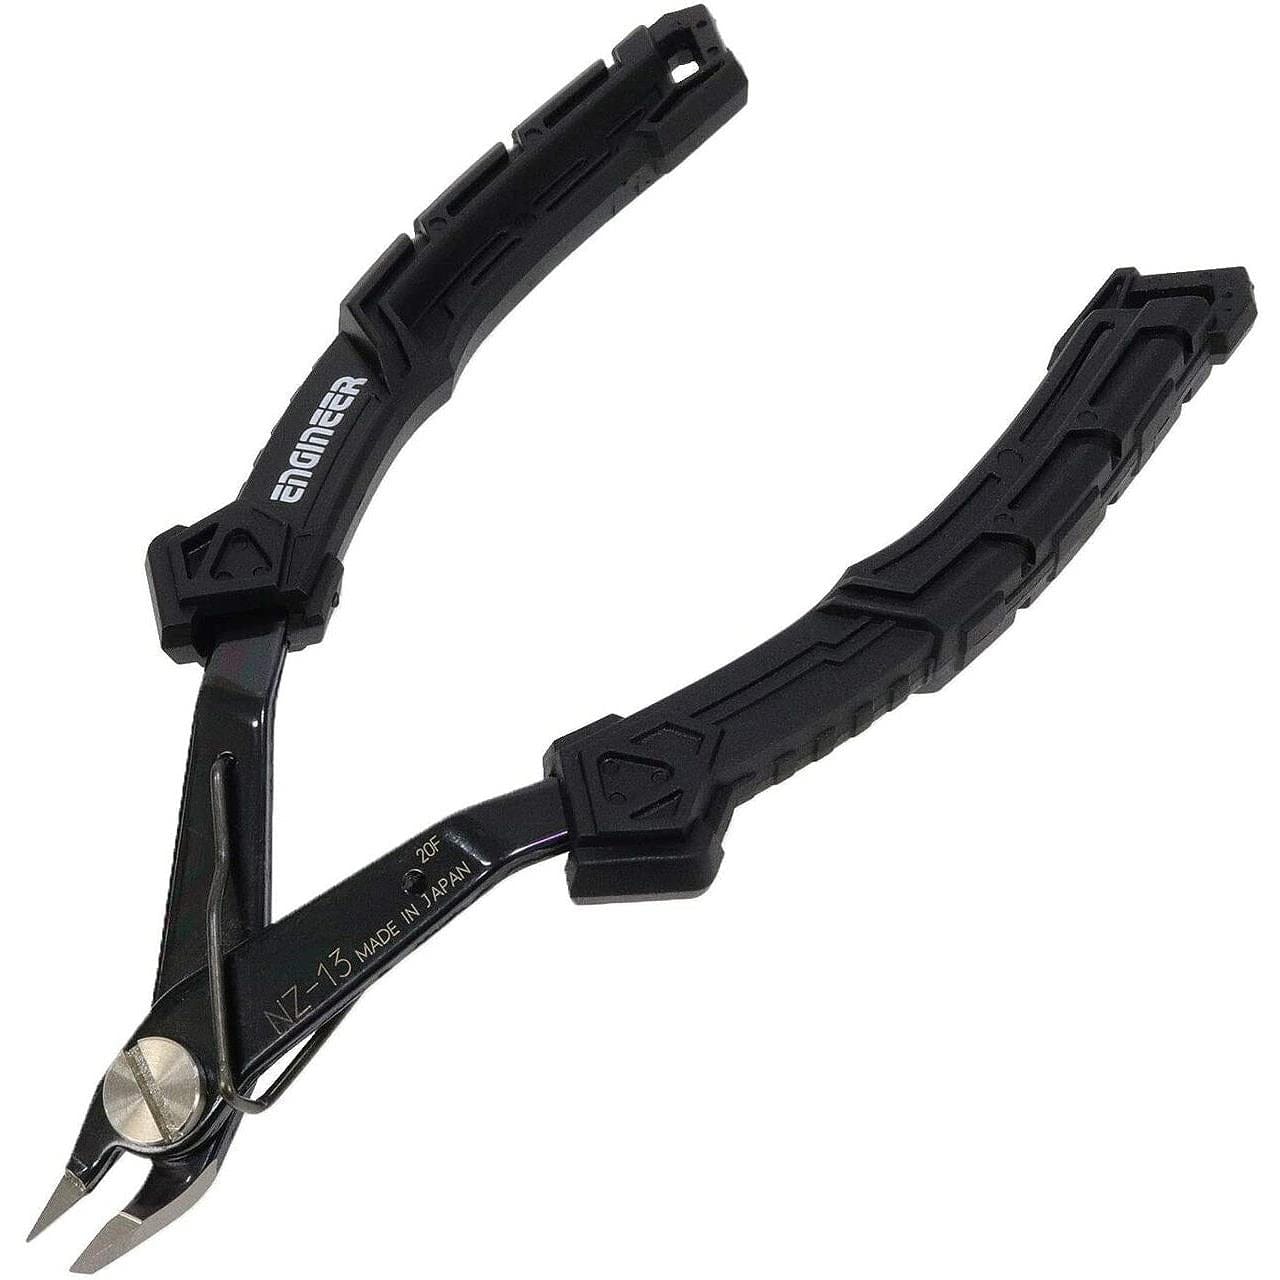 Engineer NZ-13G ESD-Safe Reversed Jaw Offset Cutters - The Pi Hut